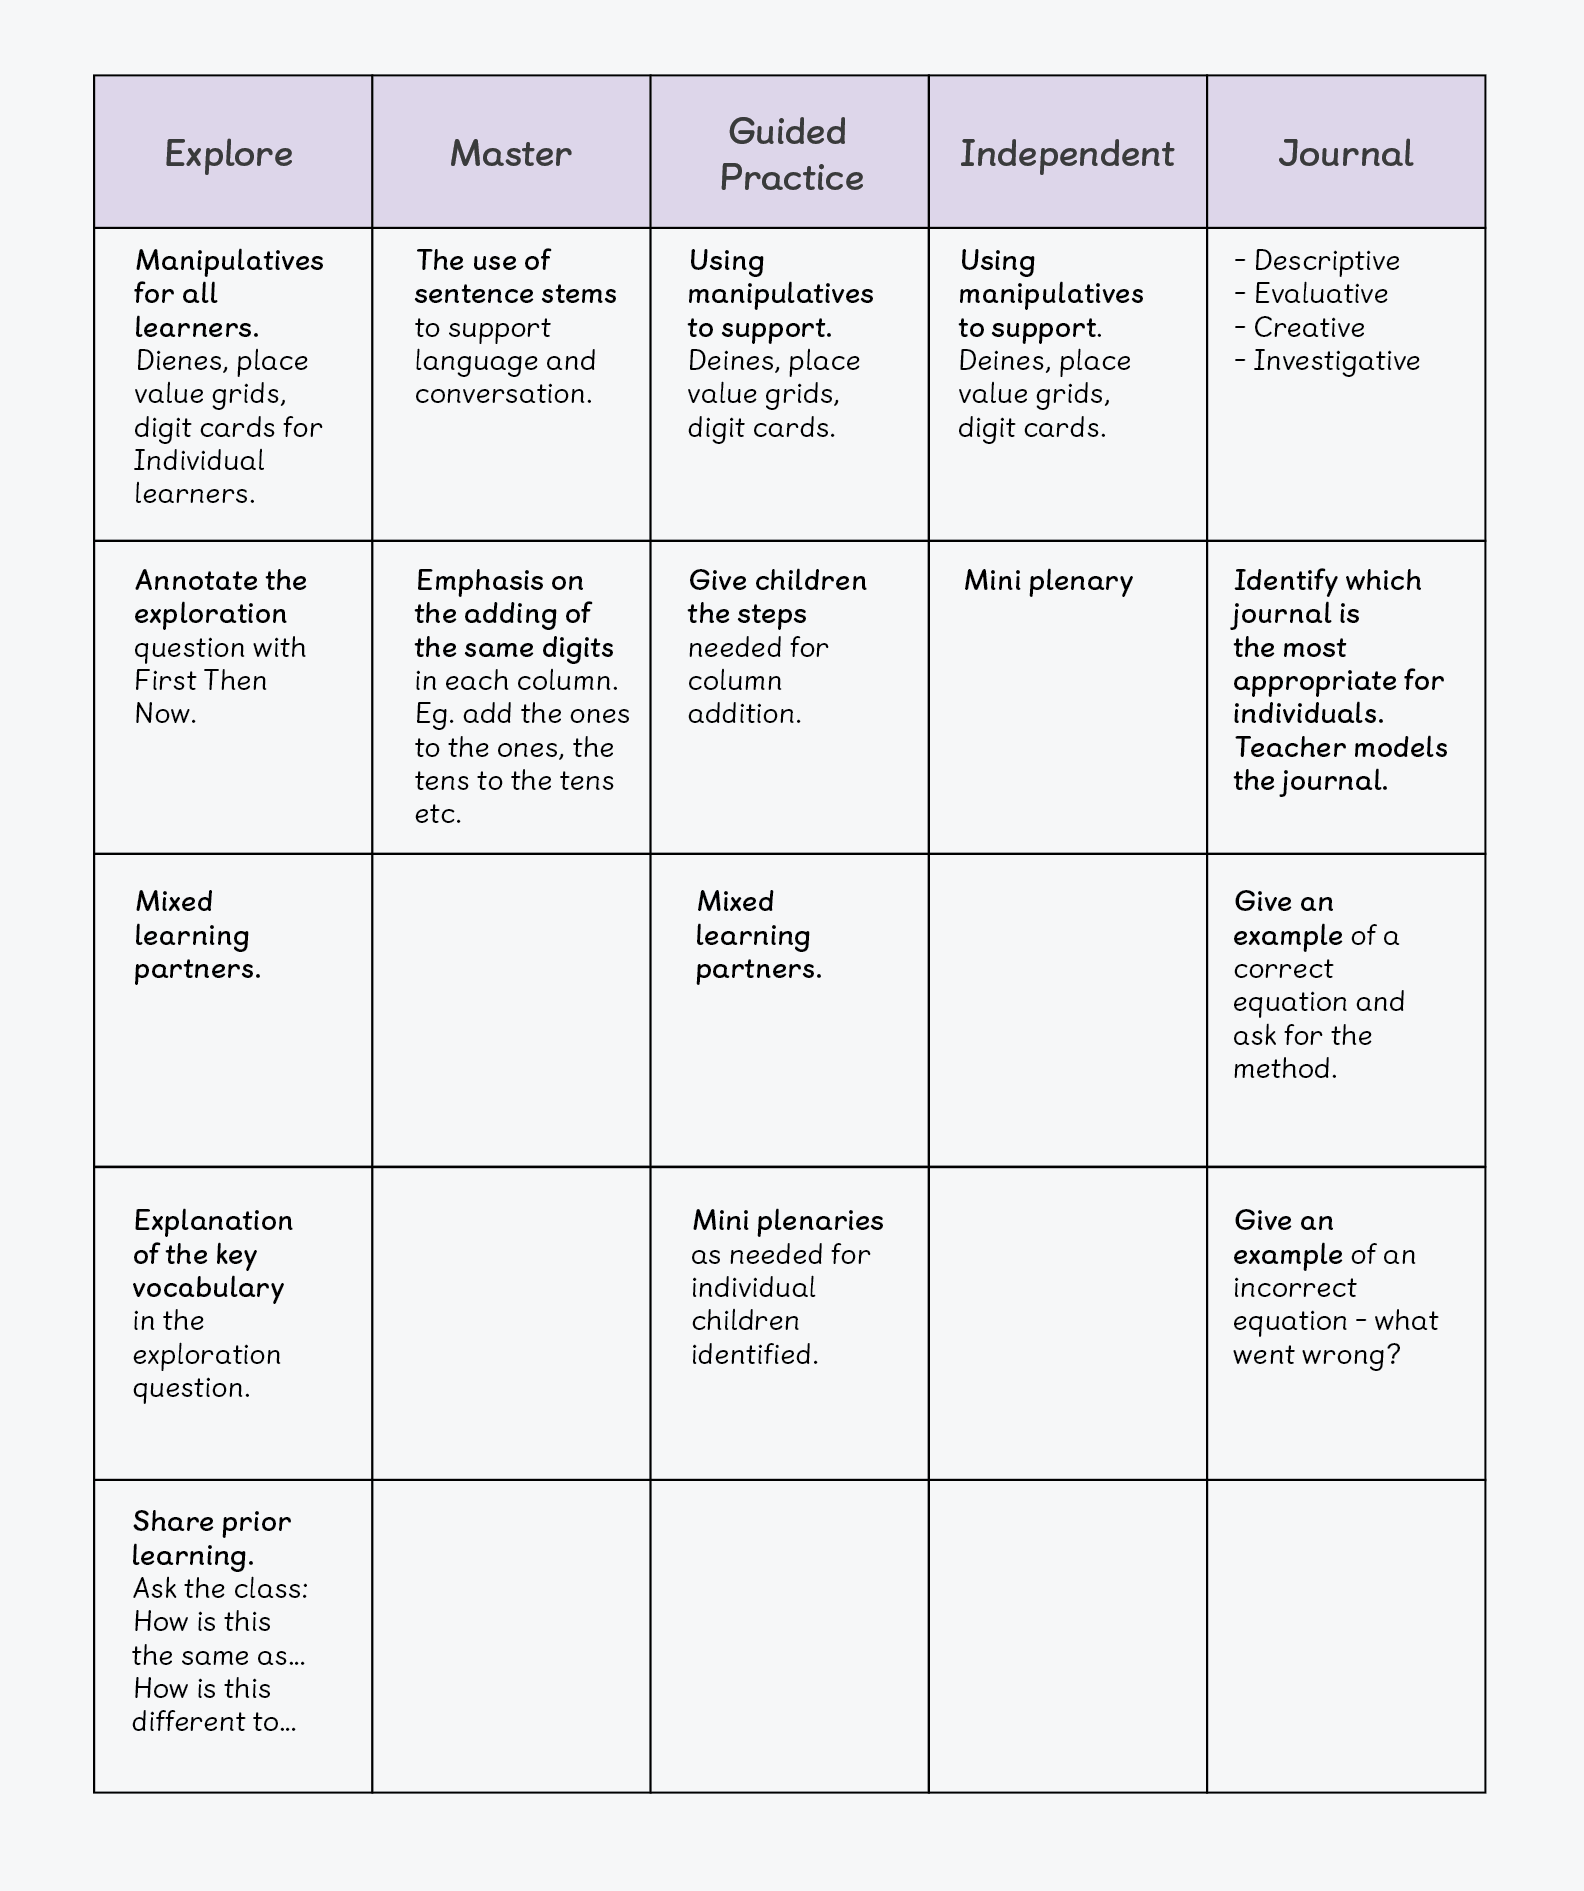 Table of ways to support learners in each stage of a maths mastery lesson. Explore, master, guided practice, independent, journal